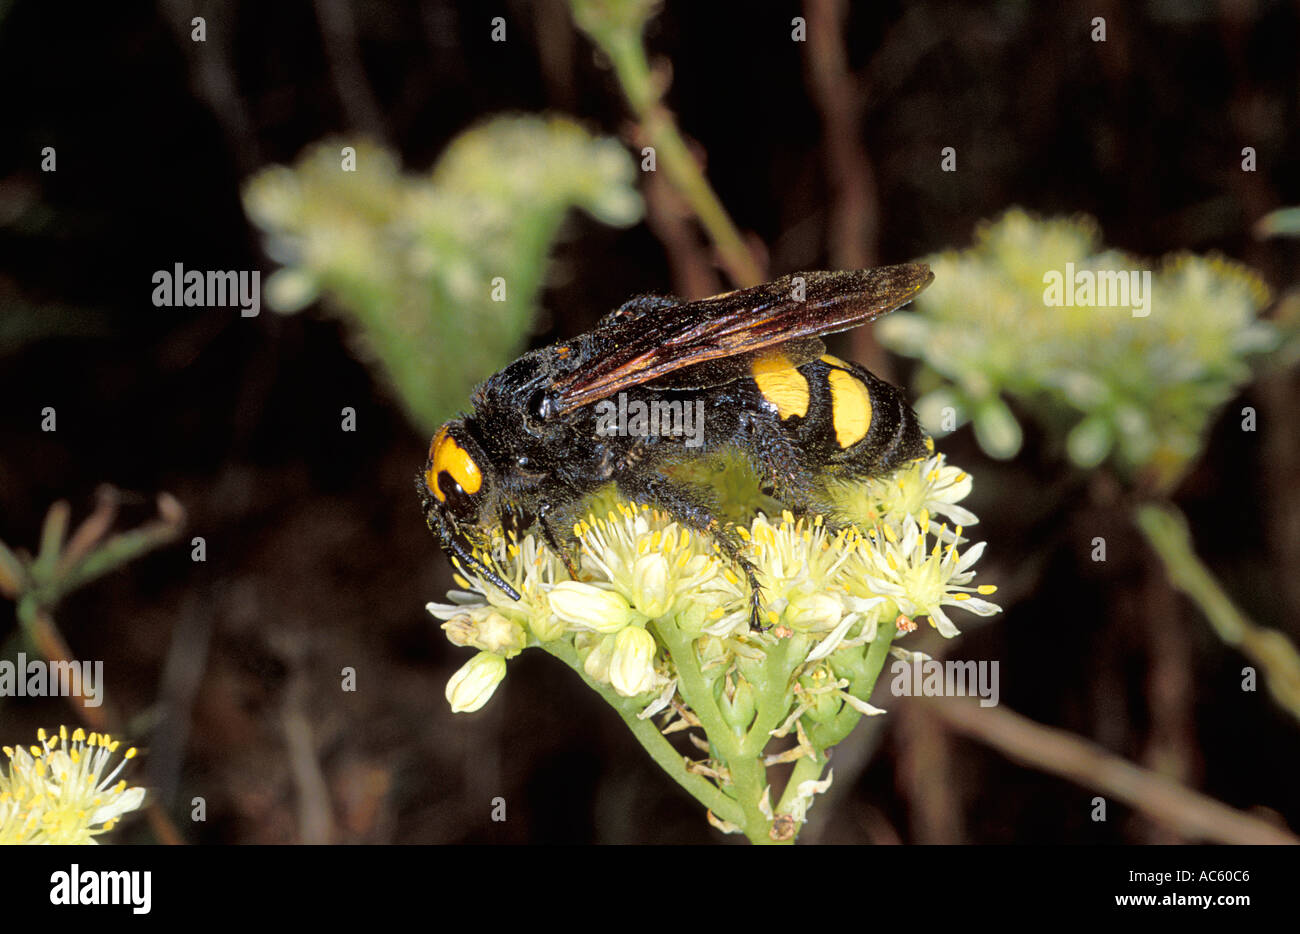 Mammoth Wasp, Megascolia maculata. Female collecting nectar on flower Stock Photo